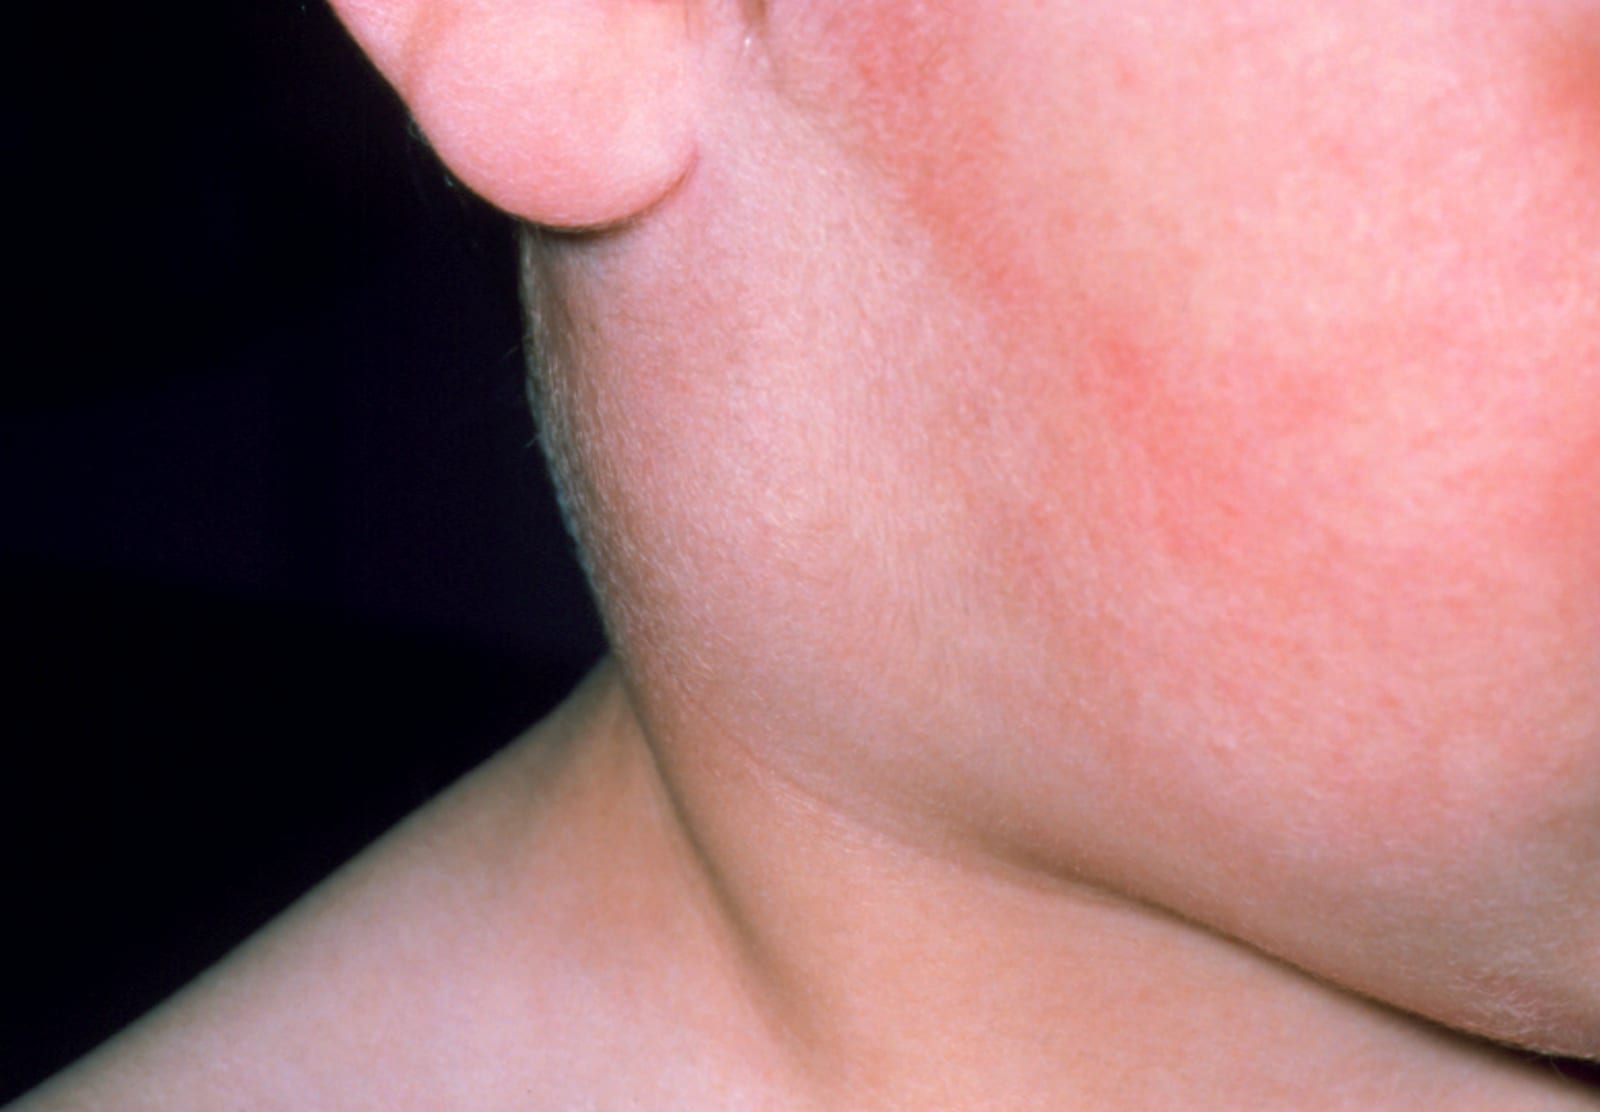 Inflamed parotid gland, child with mumps